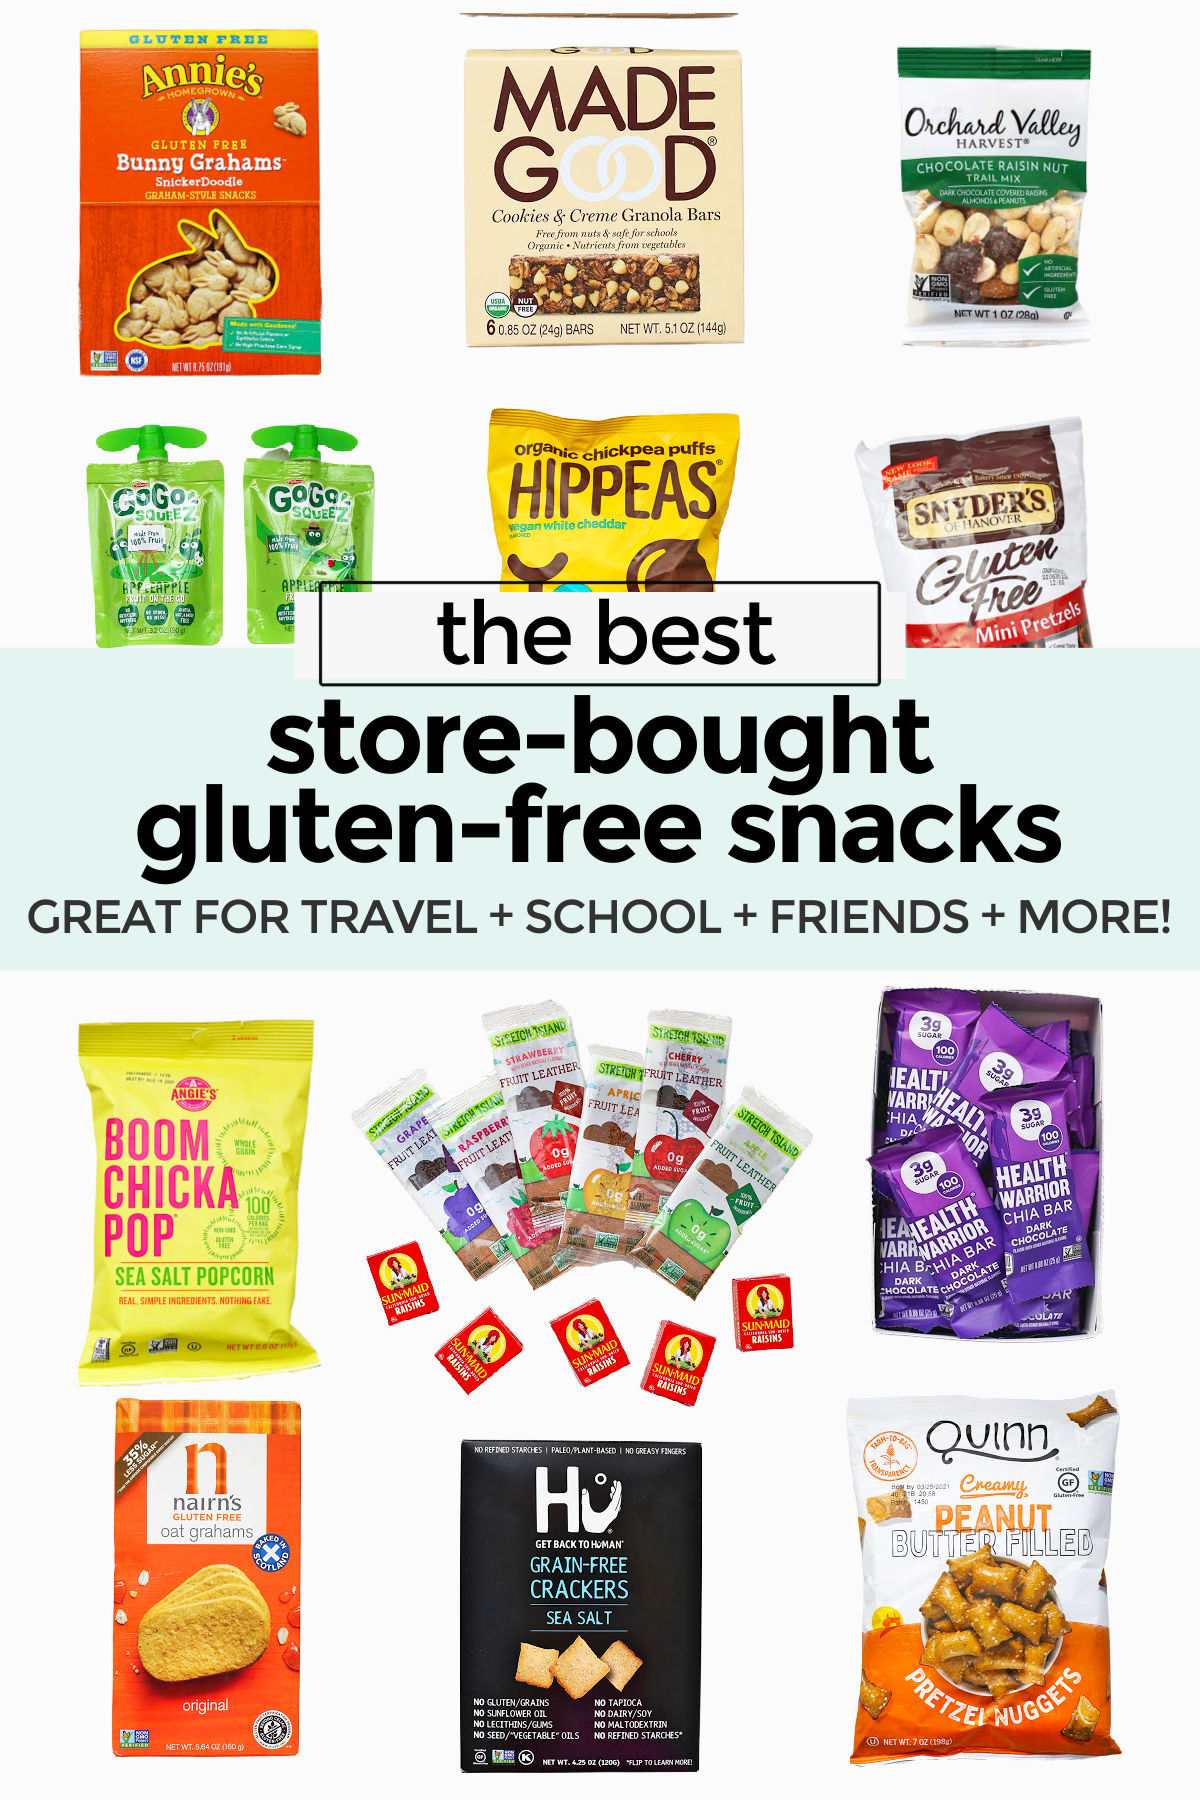 Our Favorite Store-Bought Gluten-Free Snacks For Kids. Easy to buy gluten-free snacks for kids. Perfect for school, travel, taking on the go, or keeping on hand for friends and family! // Gluten-Free Snacks // Gluten-Free Snack Ideas // Gluten-Free School Snacks // Travel Snacks // Kids Snacks // healthy kids snacks // gluten free snack ideas // gluten free snacks for school